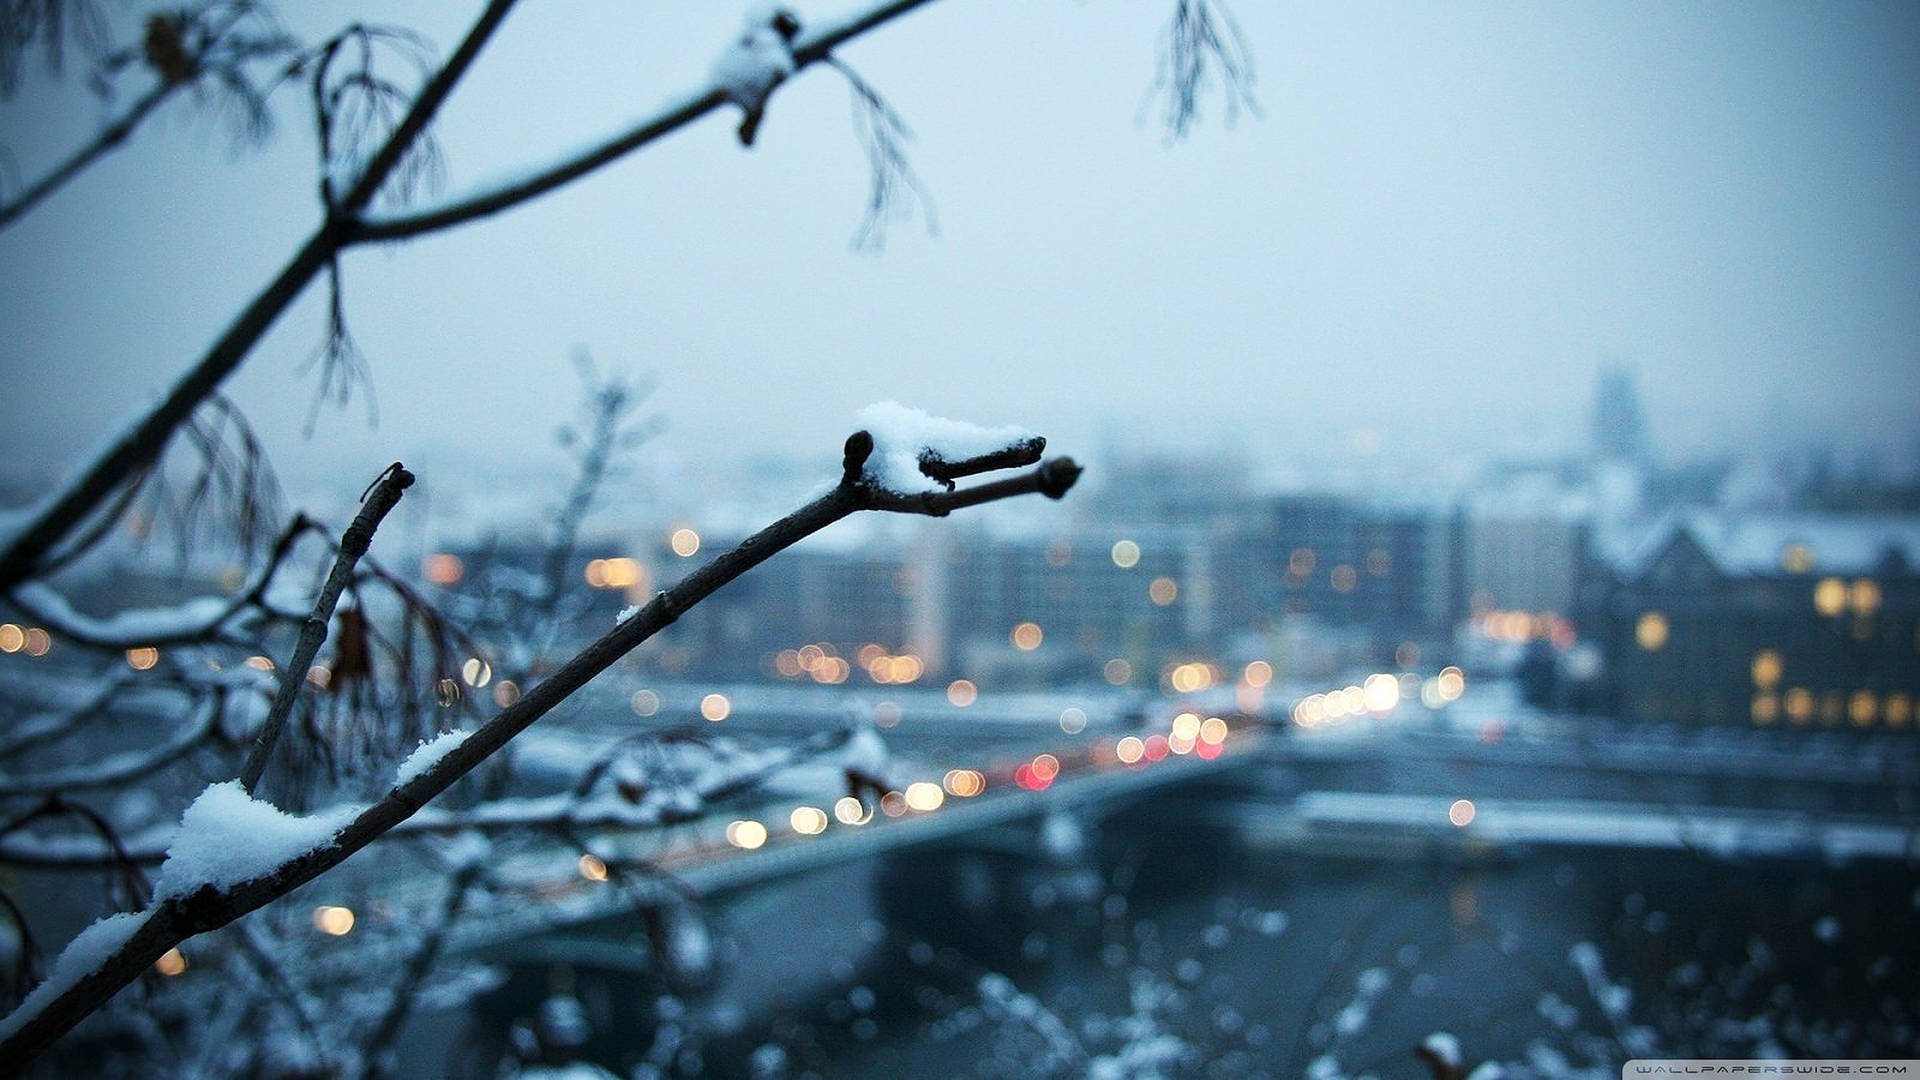 Snowy Weather In City Background